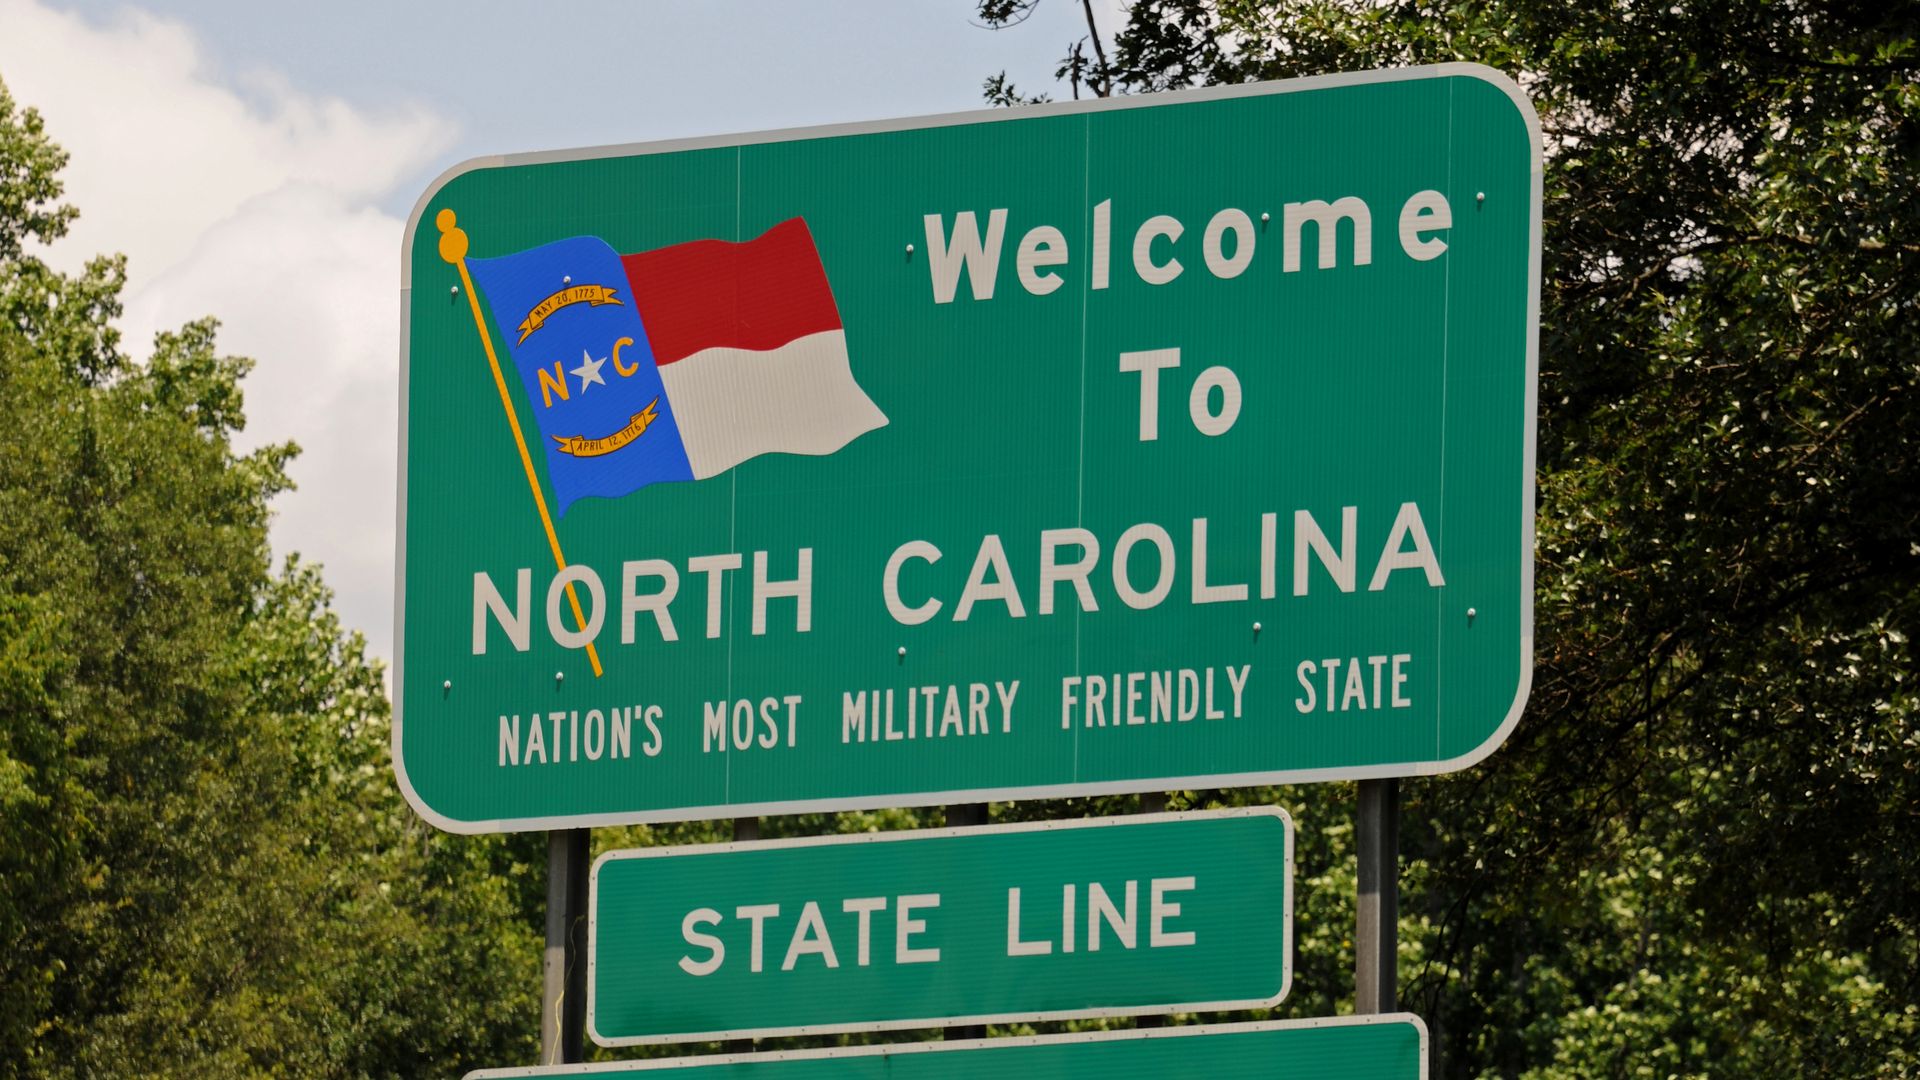 A "Welcome to North Carolina" sign.